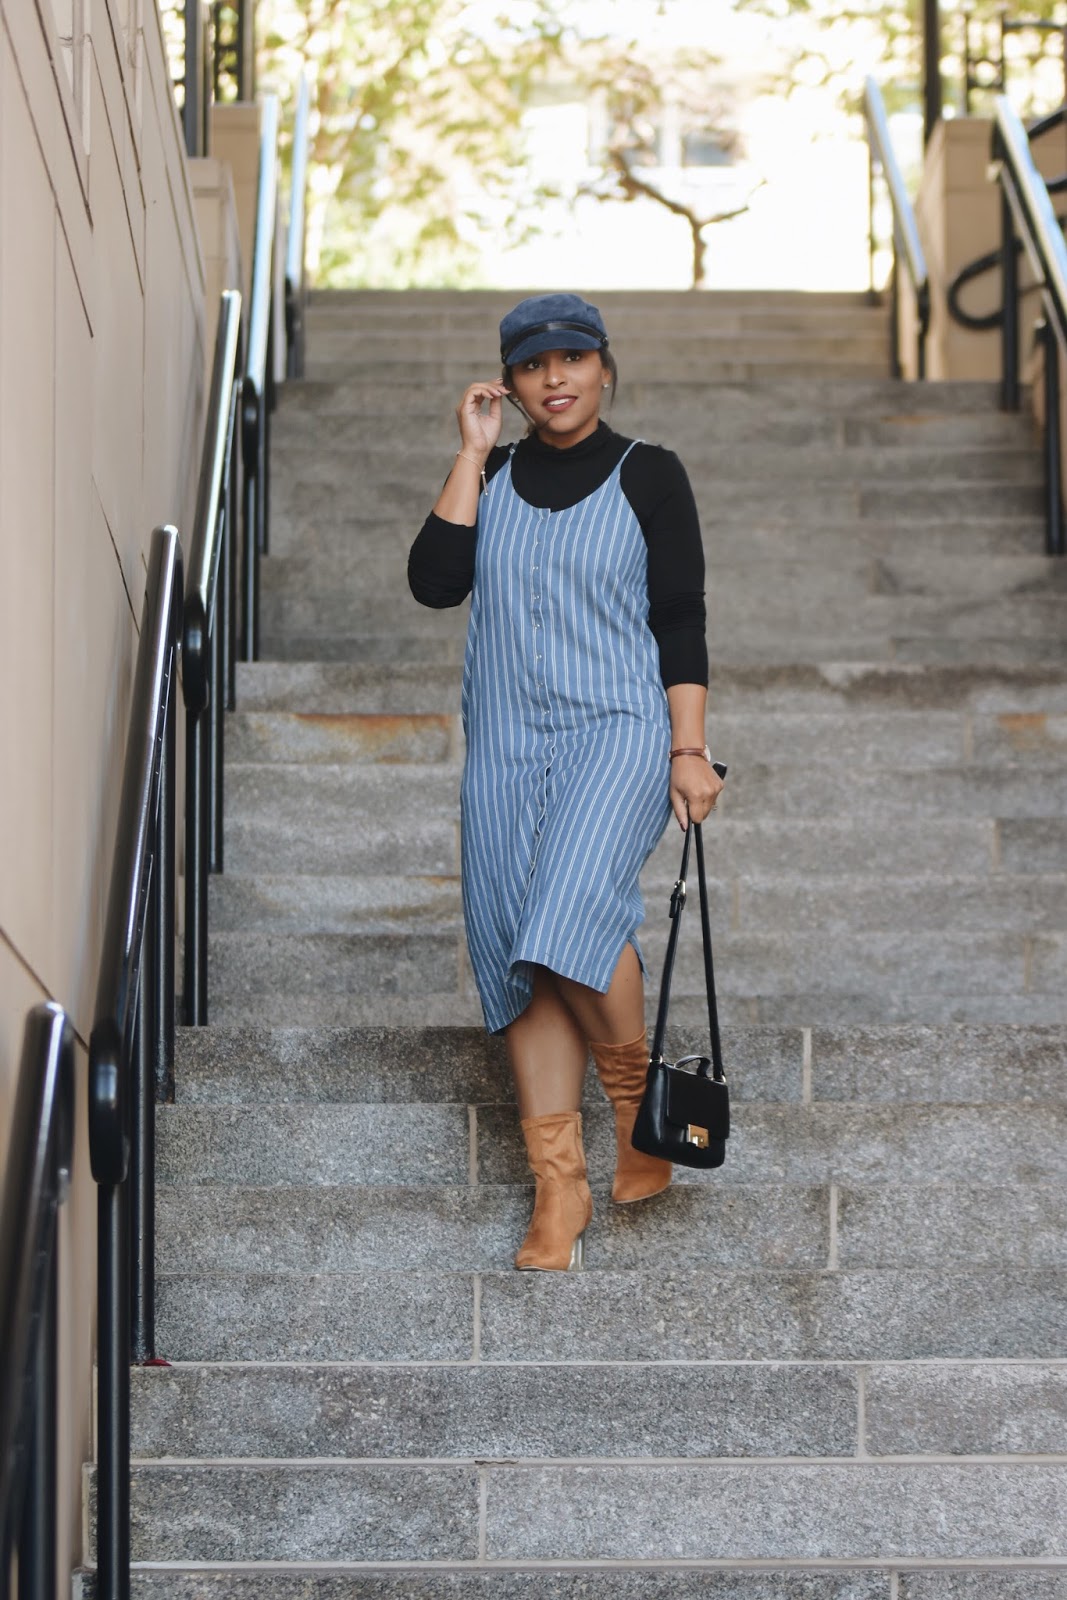 shop maude, pinstripe, fall fashion, cabbie hat, fall boots, fall outfit ideas, pinstripe dress, dc bloggers, cabbie hat trend, fall dresses